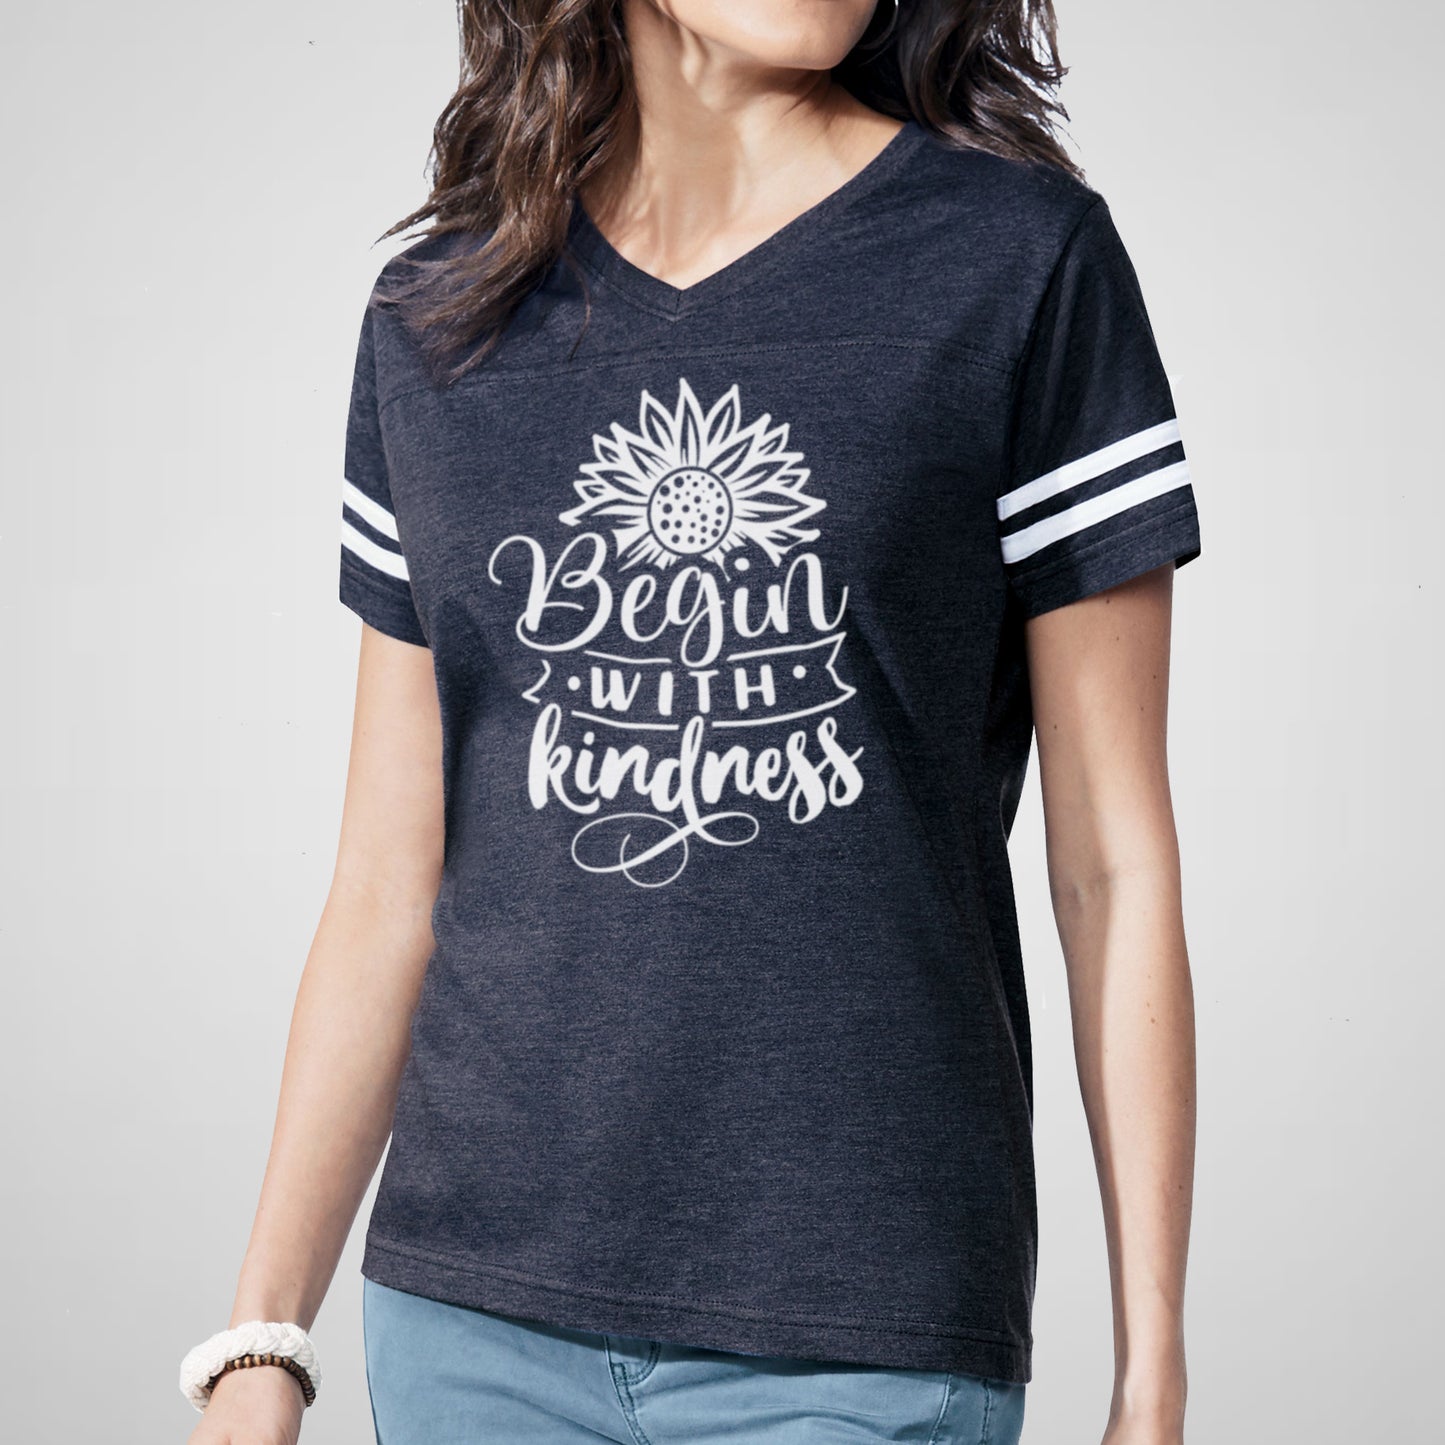 Begin with Kindness Sunflower - Women’s Cotton/Poly Football Tee